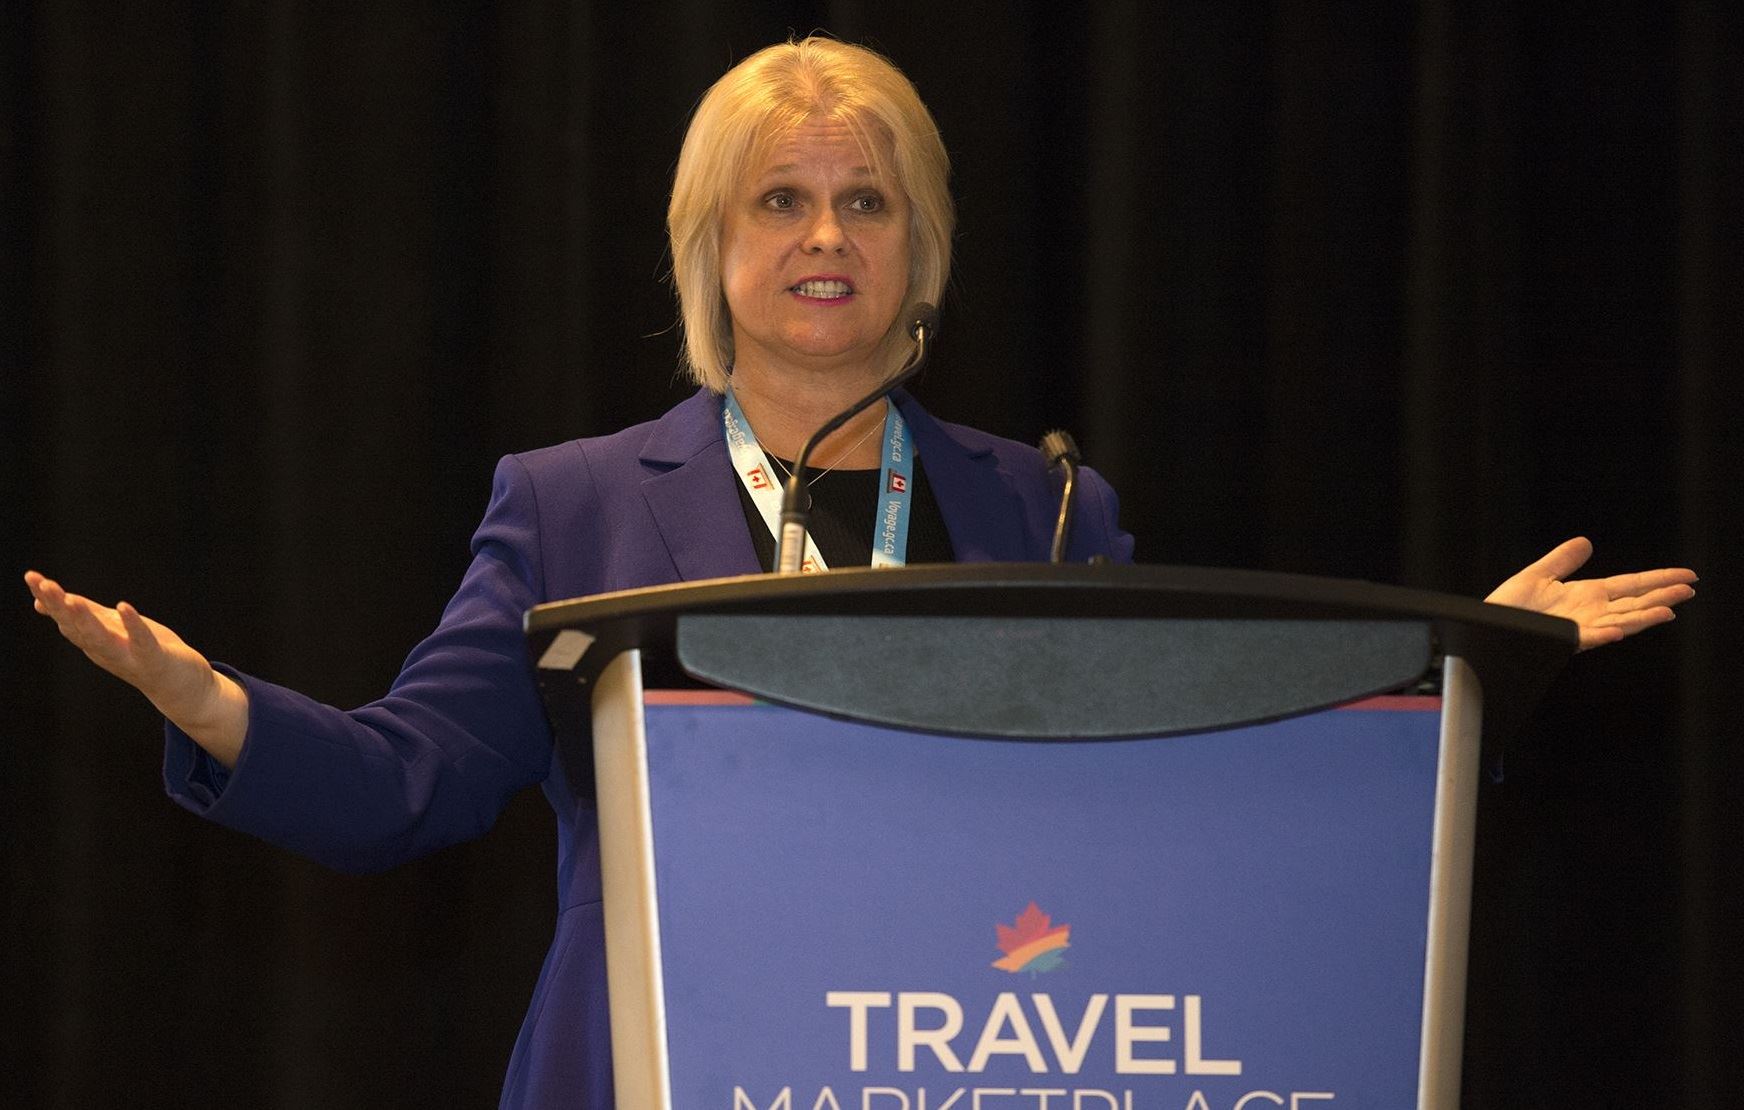 Canada’s Travel Agency Community Responds to Ontario Government’s Proposed Regulatory Changes